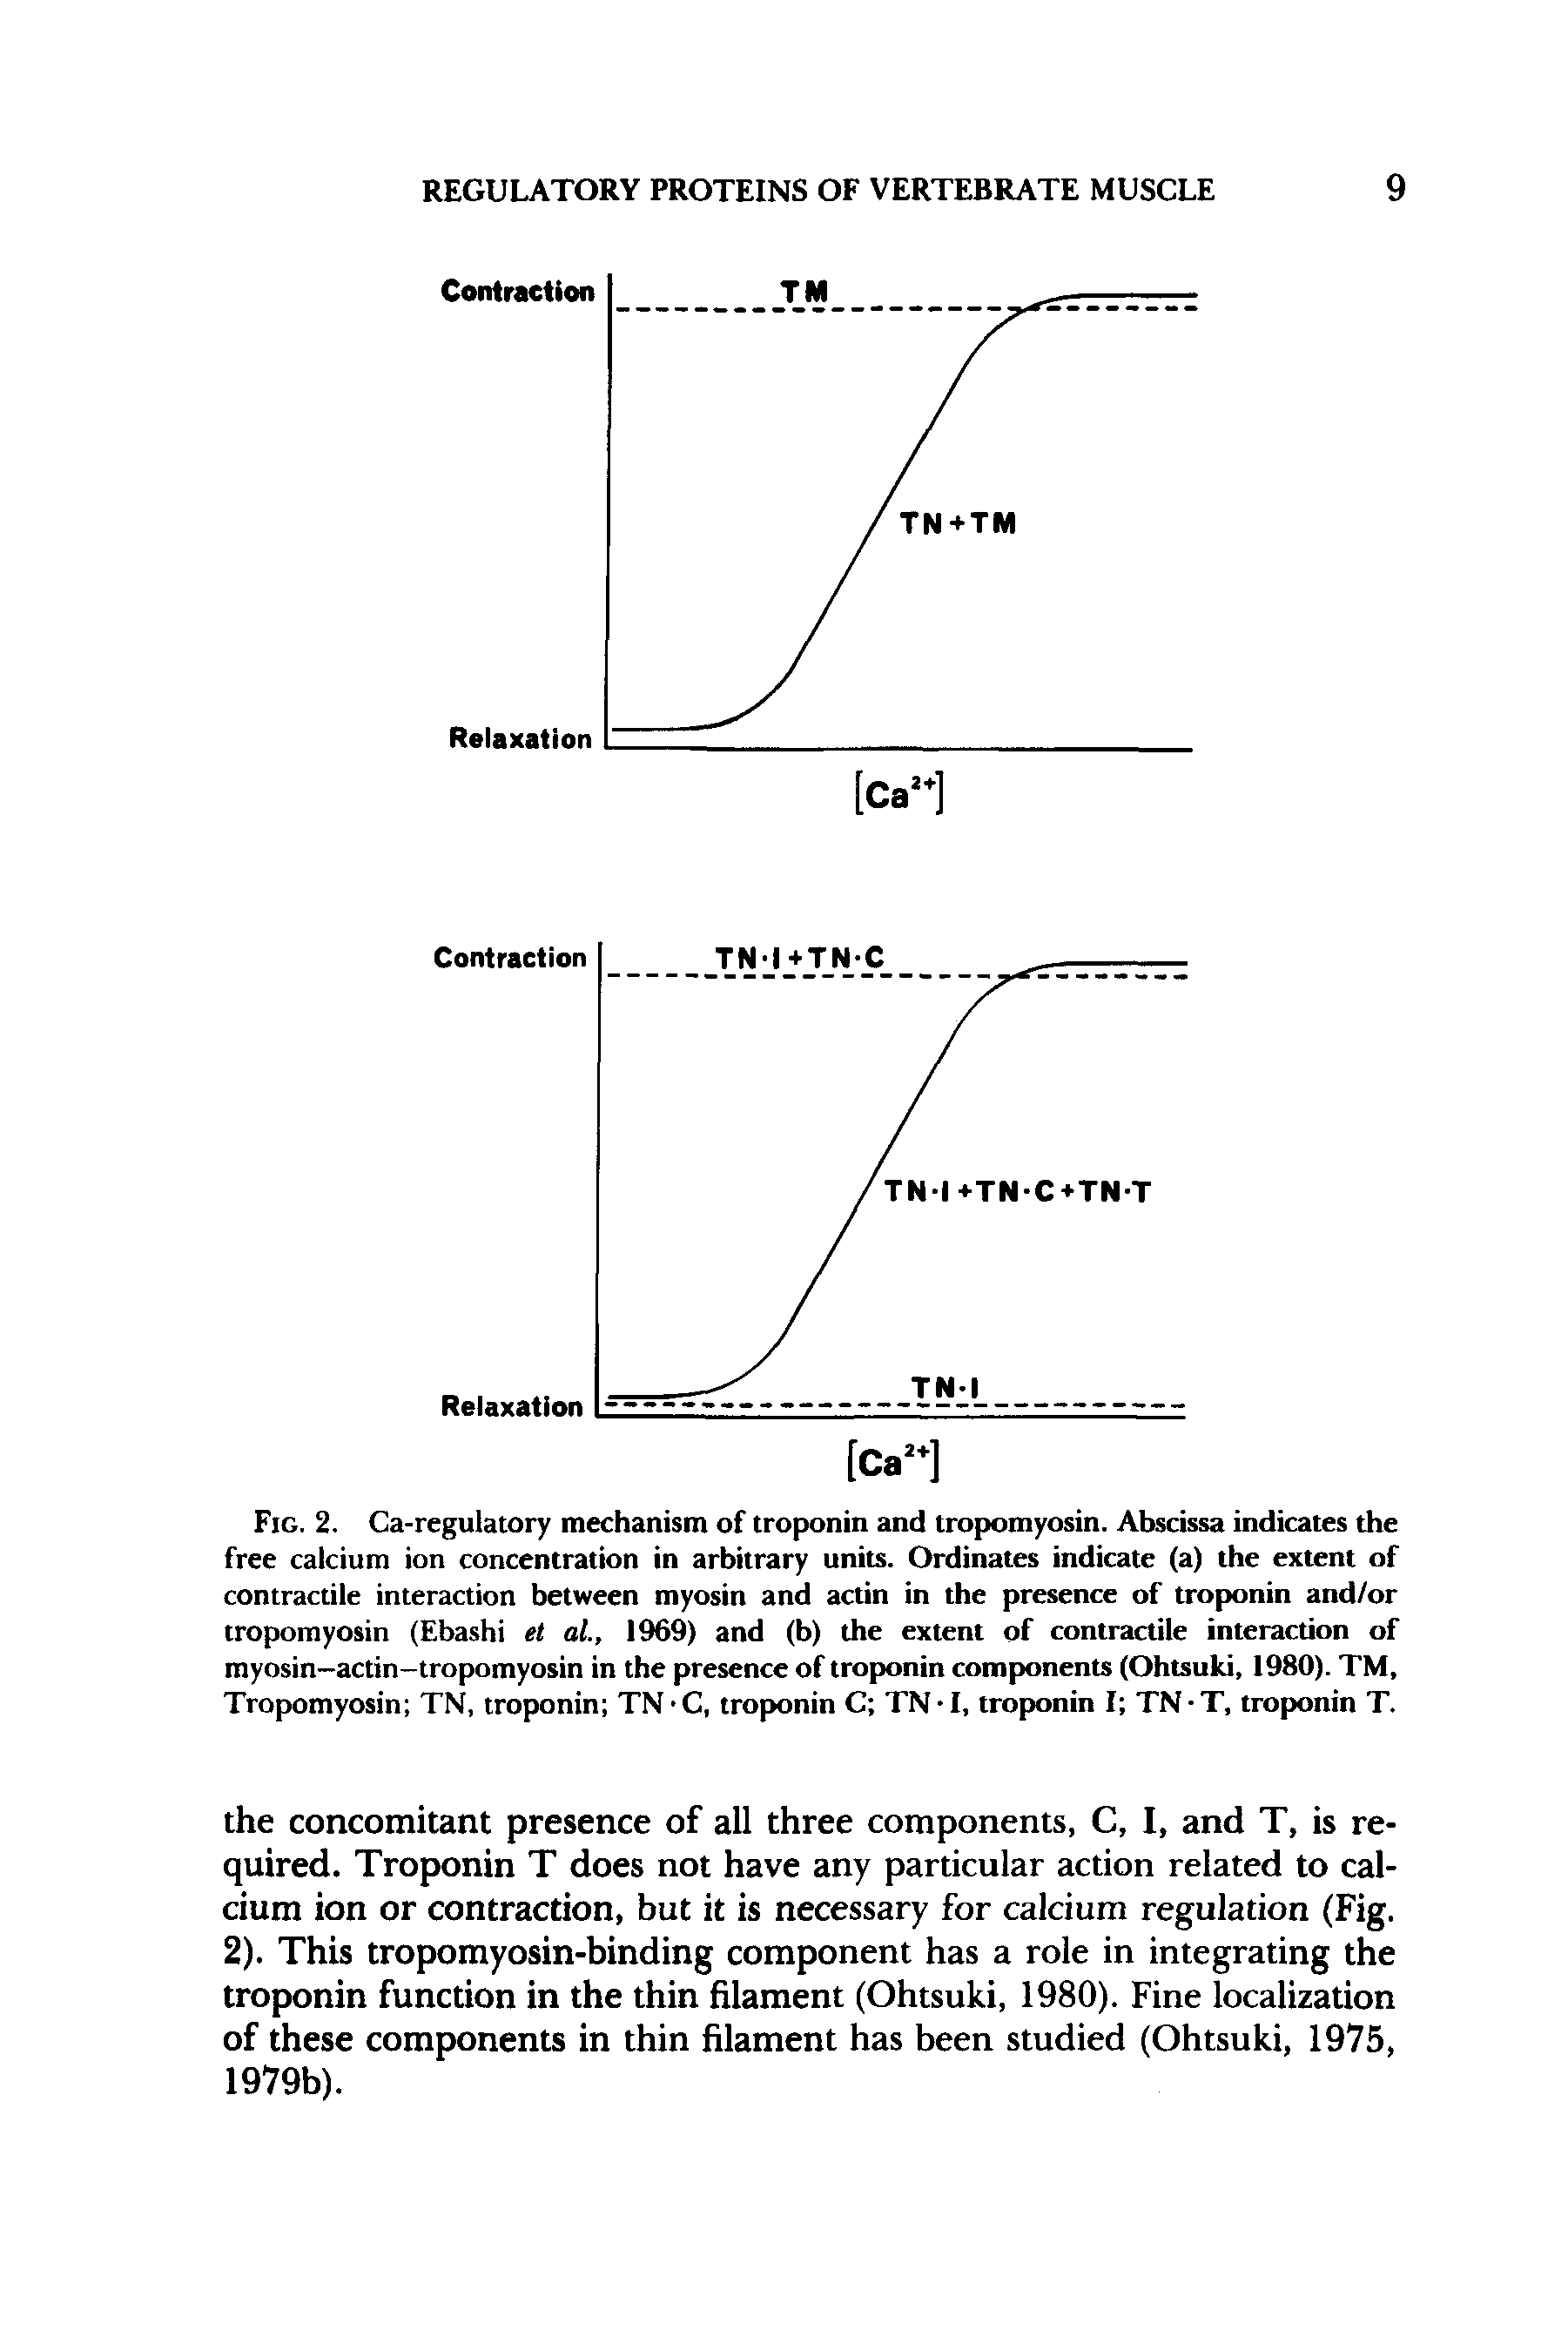 Fig. 2. Ca-regulatory mechanism of troponin and tropomyosin. Abscissa indicates the free calcium ion concentration in arbitrary units. Ordinates indicate (a) the extent of contractile interaction between myosin and actin in the presence of troponin and/or tropomyosin (Ebashi et al, 1969) and (b) the extent of contractile interaction of myosin-actin-tropomyosin in the presence of troponin components (Ohtsuki, 1980). TM, Tropomyosin TN, troponin TN -C, troponin C TN-I, troponin I TN-T, troponin T.